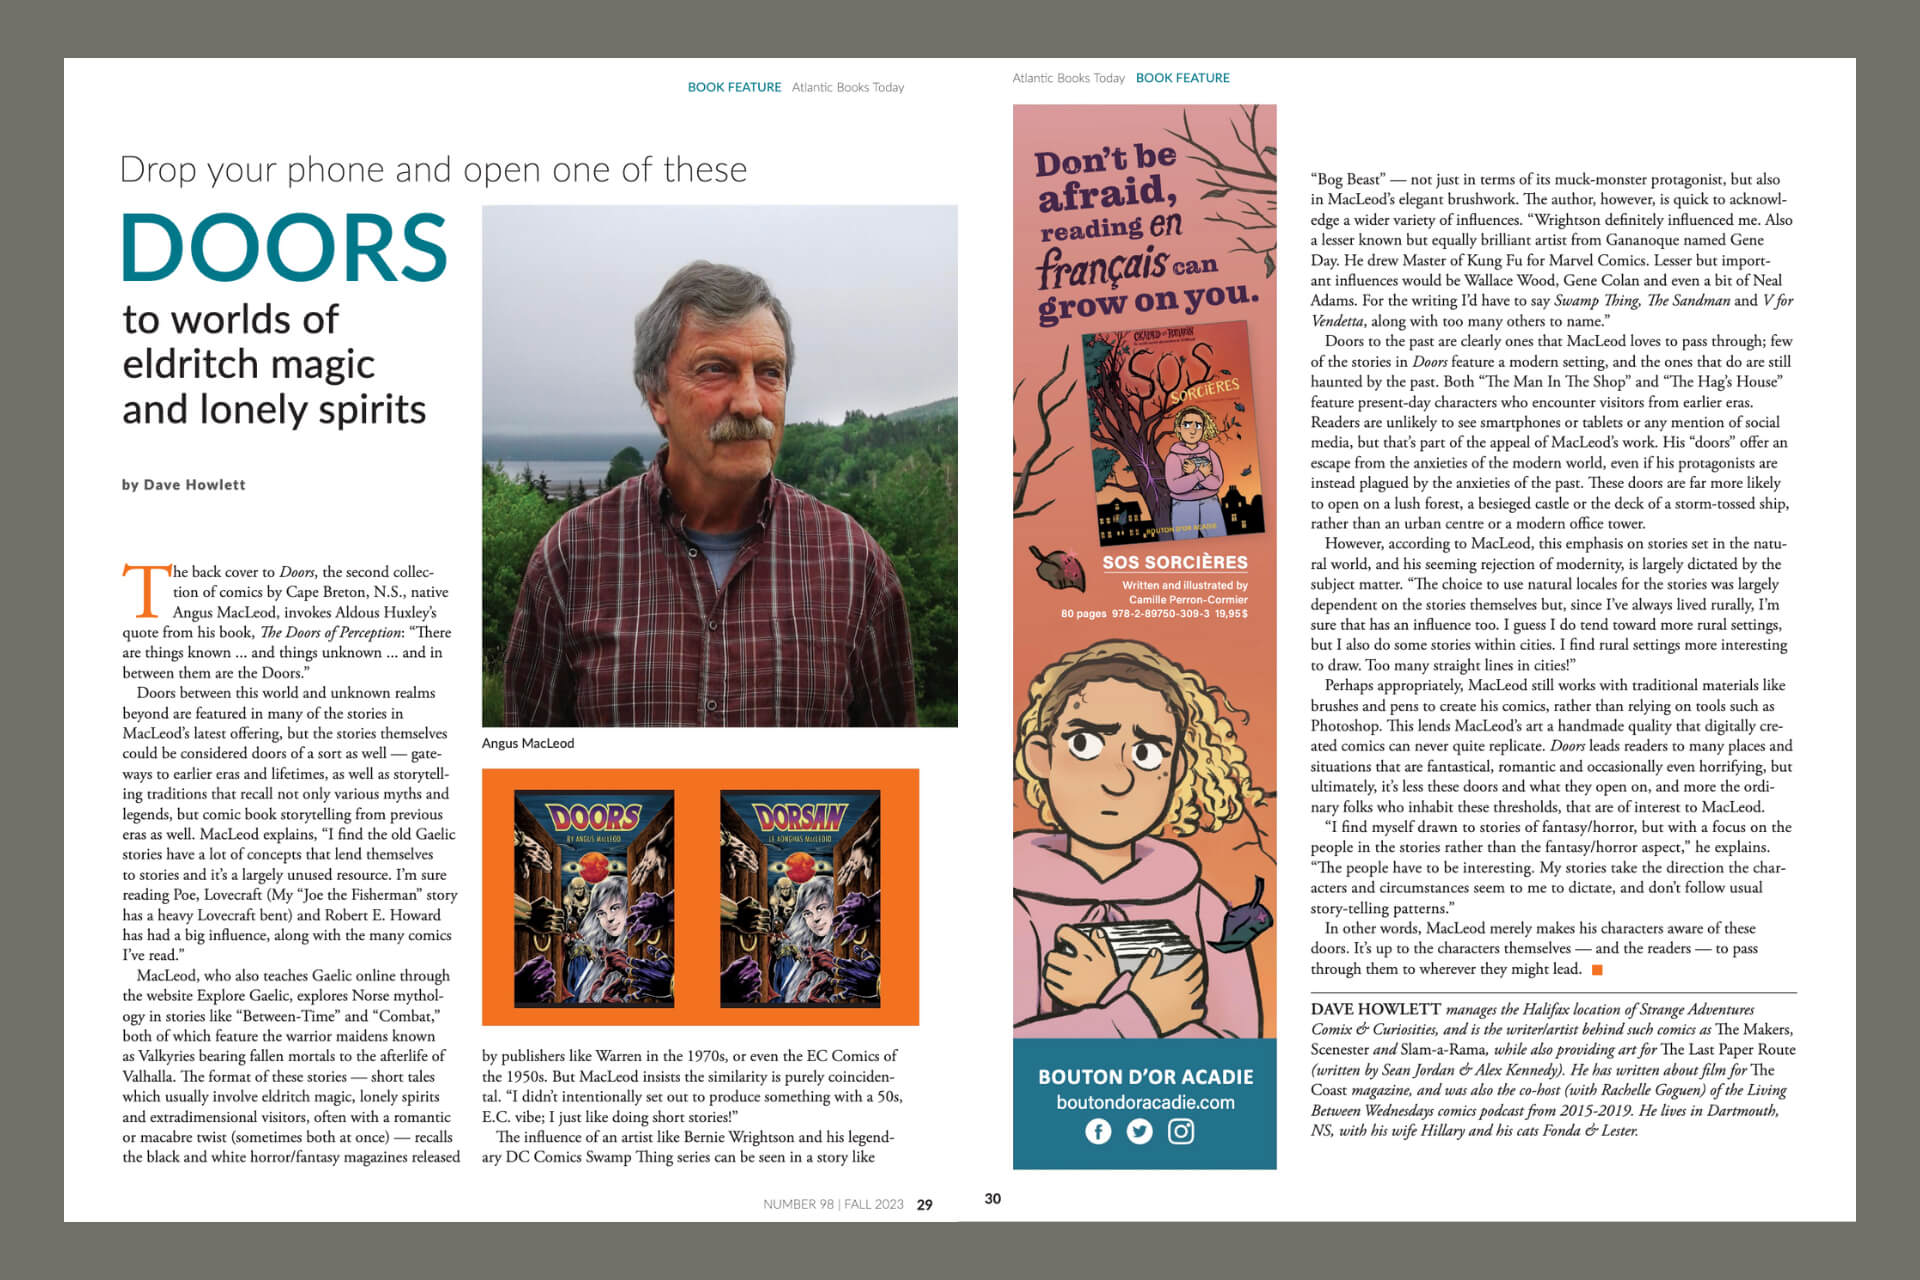 Author-artist Angus MacLeod featured in Atlantic Books Today no. 98